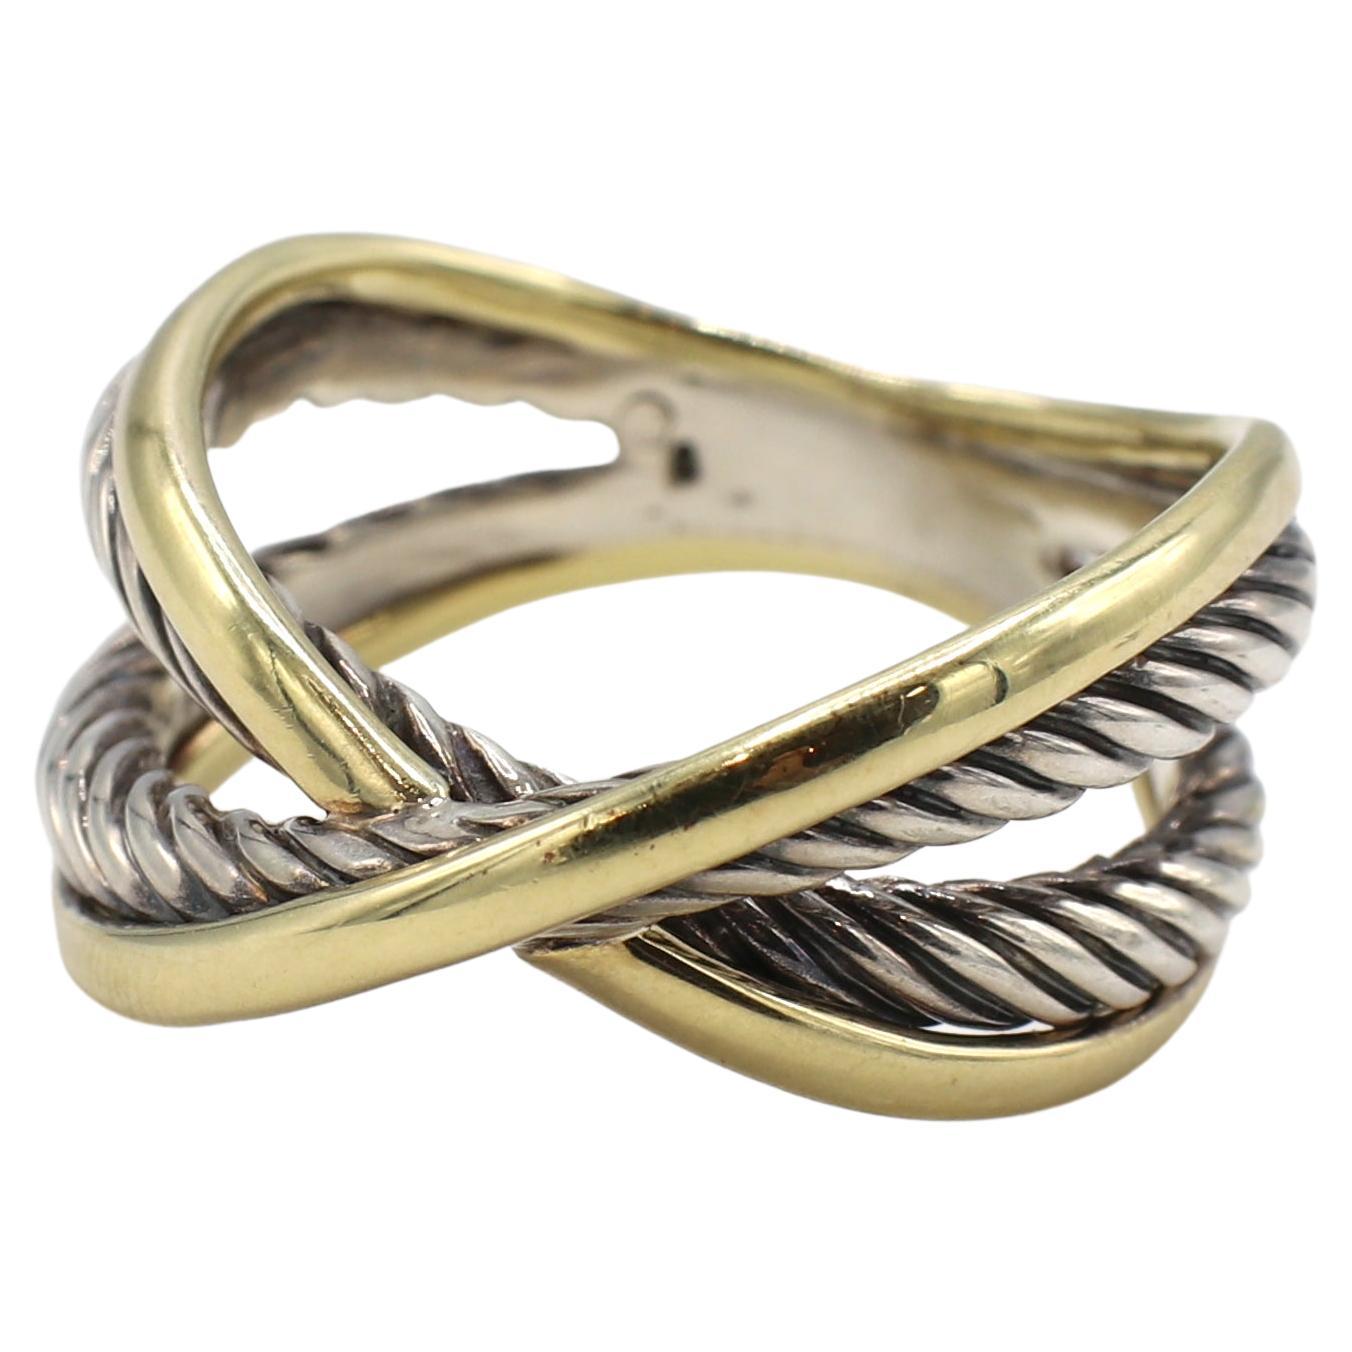 David Yurman Sterling Silver & Gold Cable Crossover Band Ring 
Metal: Sterling silver & 18k yellow gold
Weight: 8.68 grams
Size: 8 (US)
Width: 3 - 11.8mm
Signed: D.Y. 750 925
